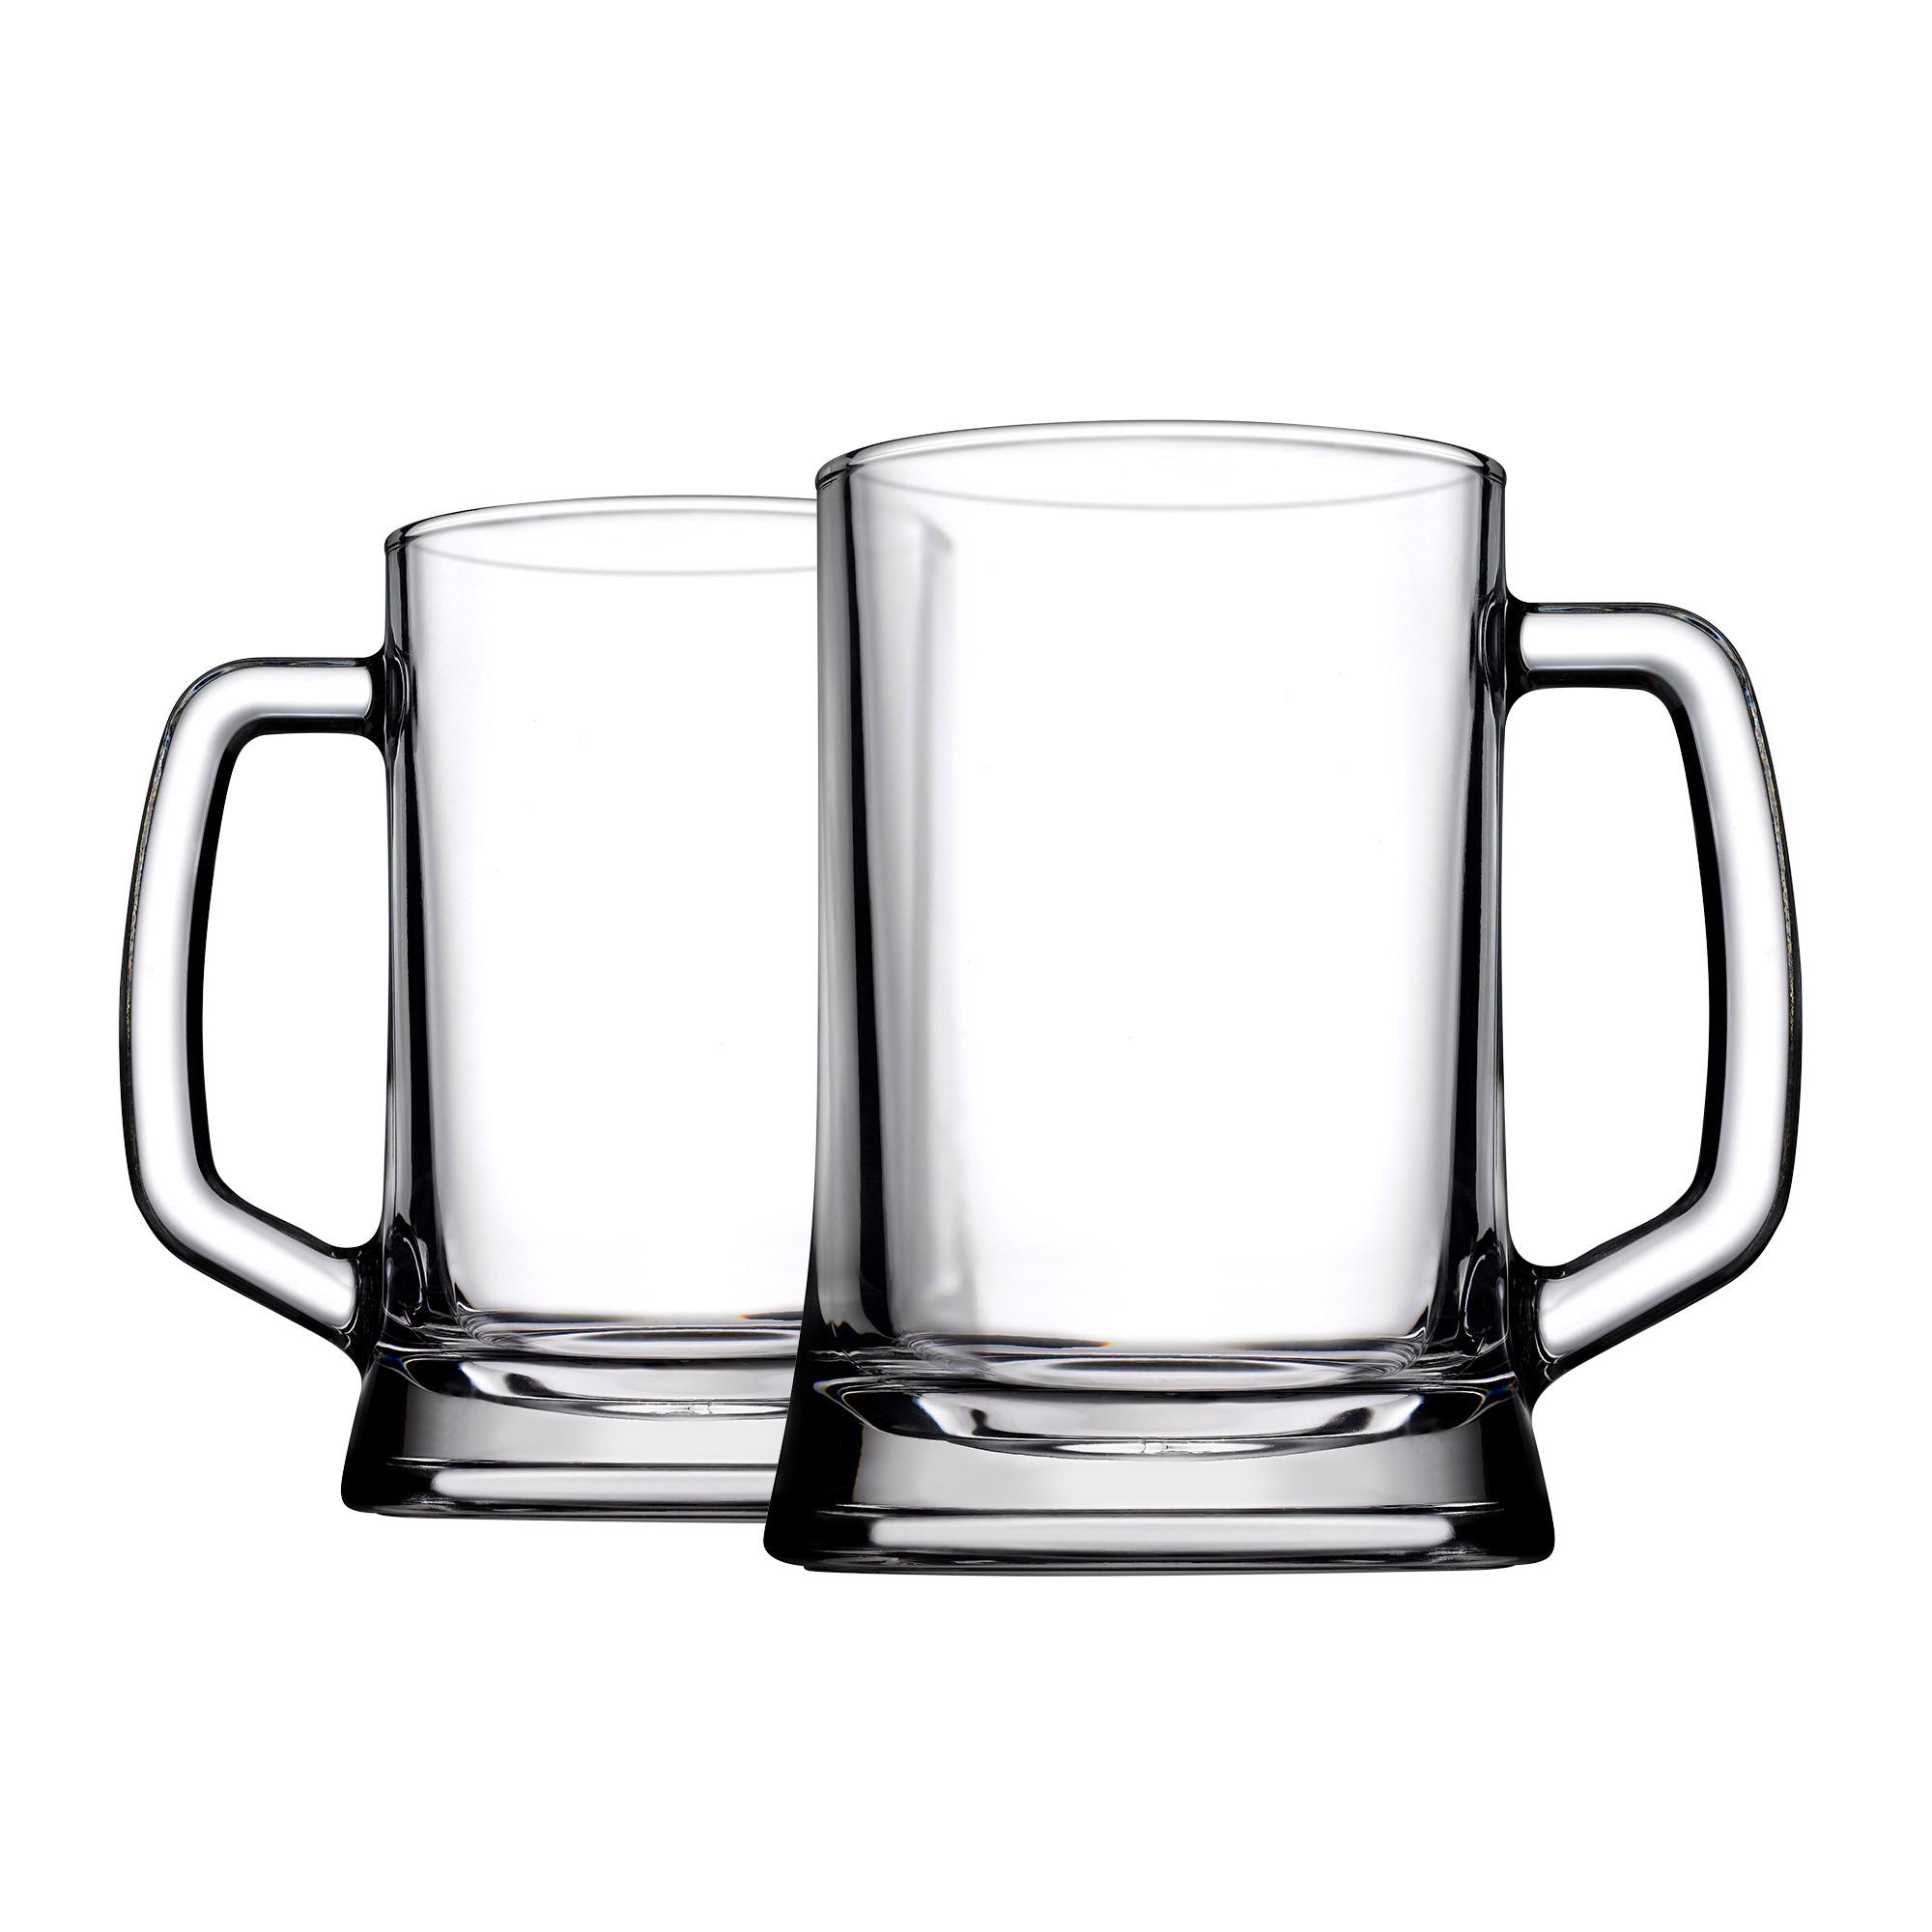 Pasabahce Pub Beer Stein 500ml Set of 2 Image 1